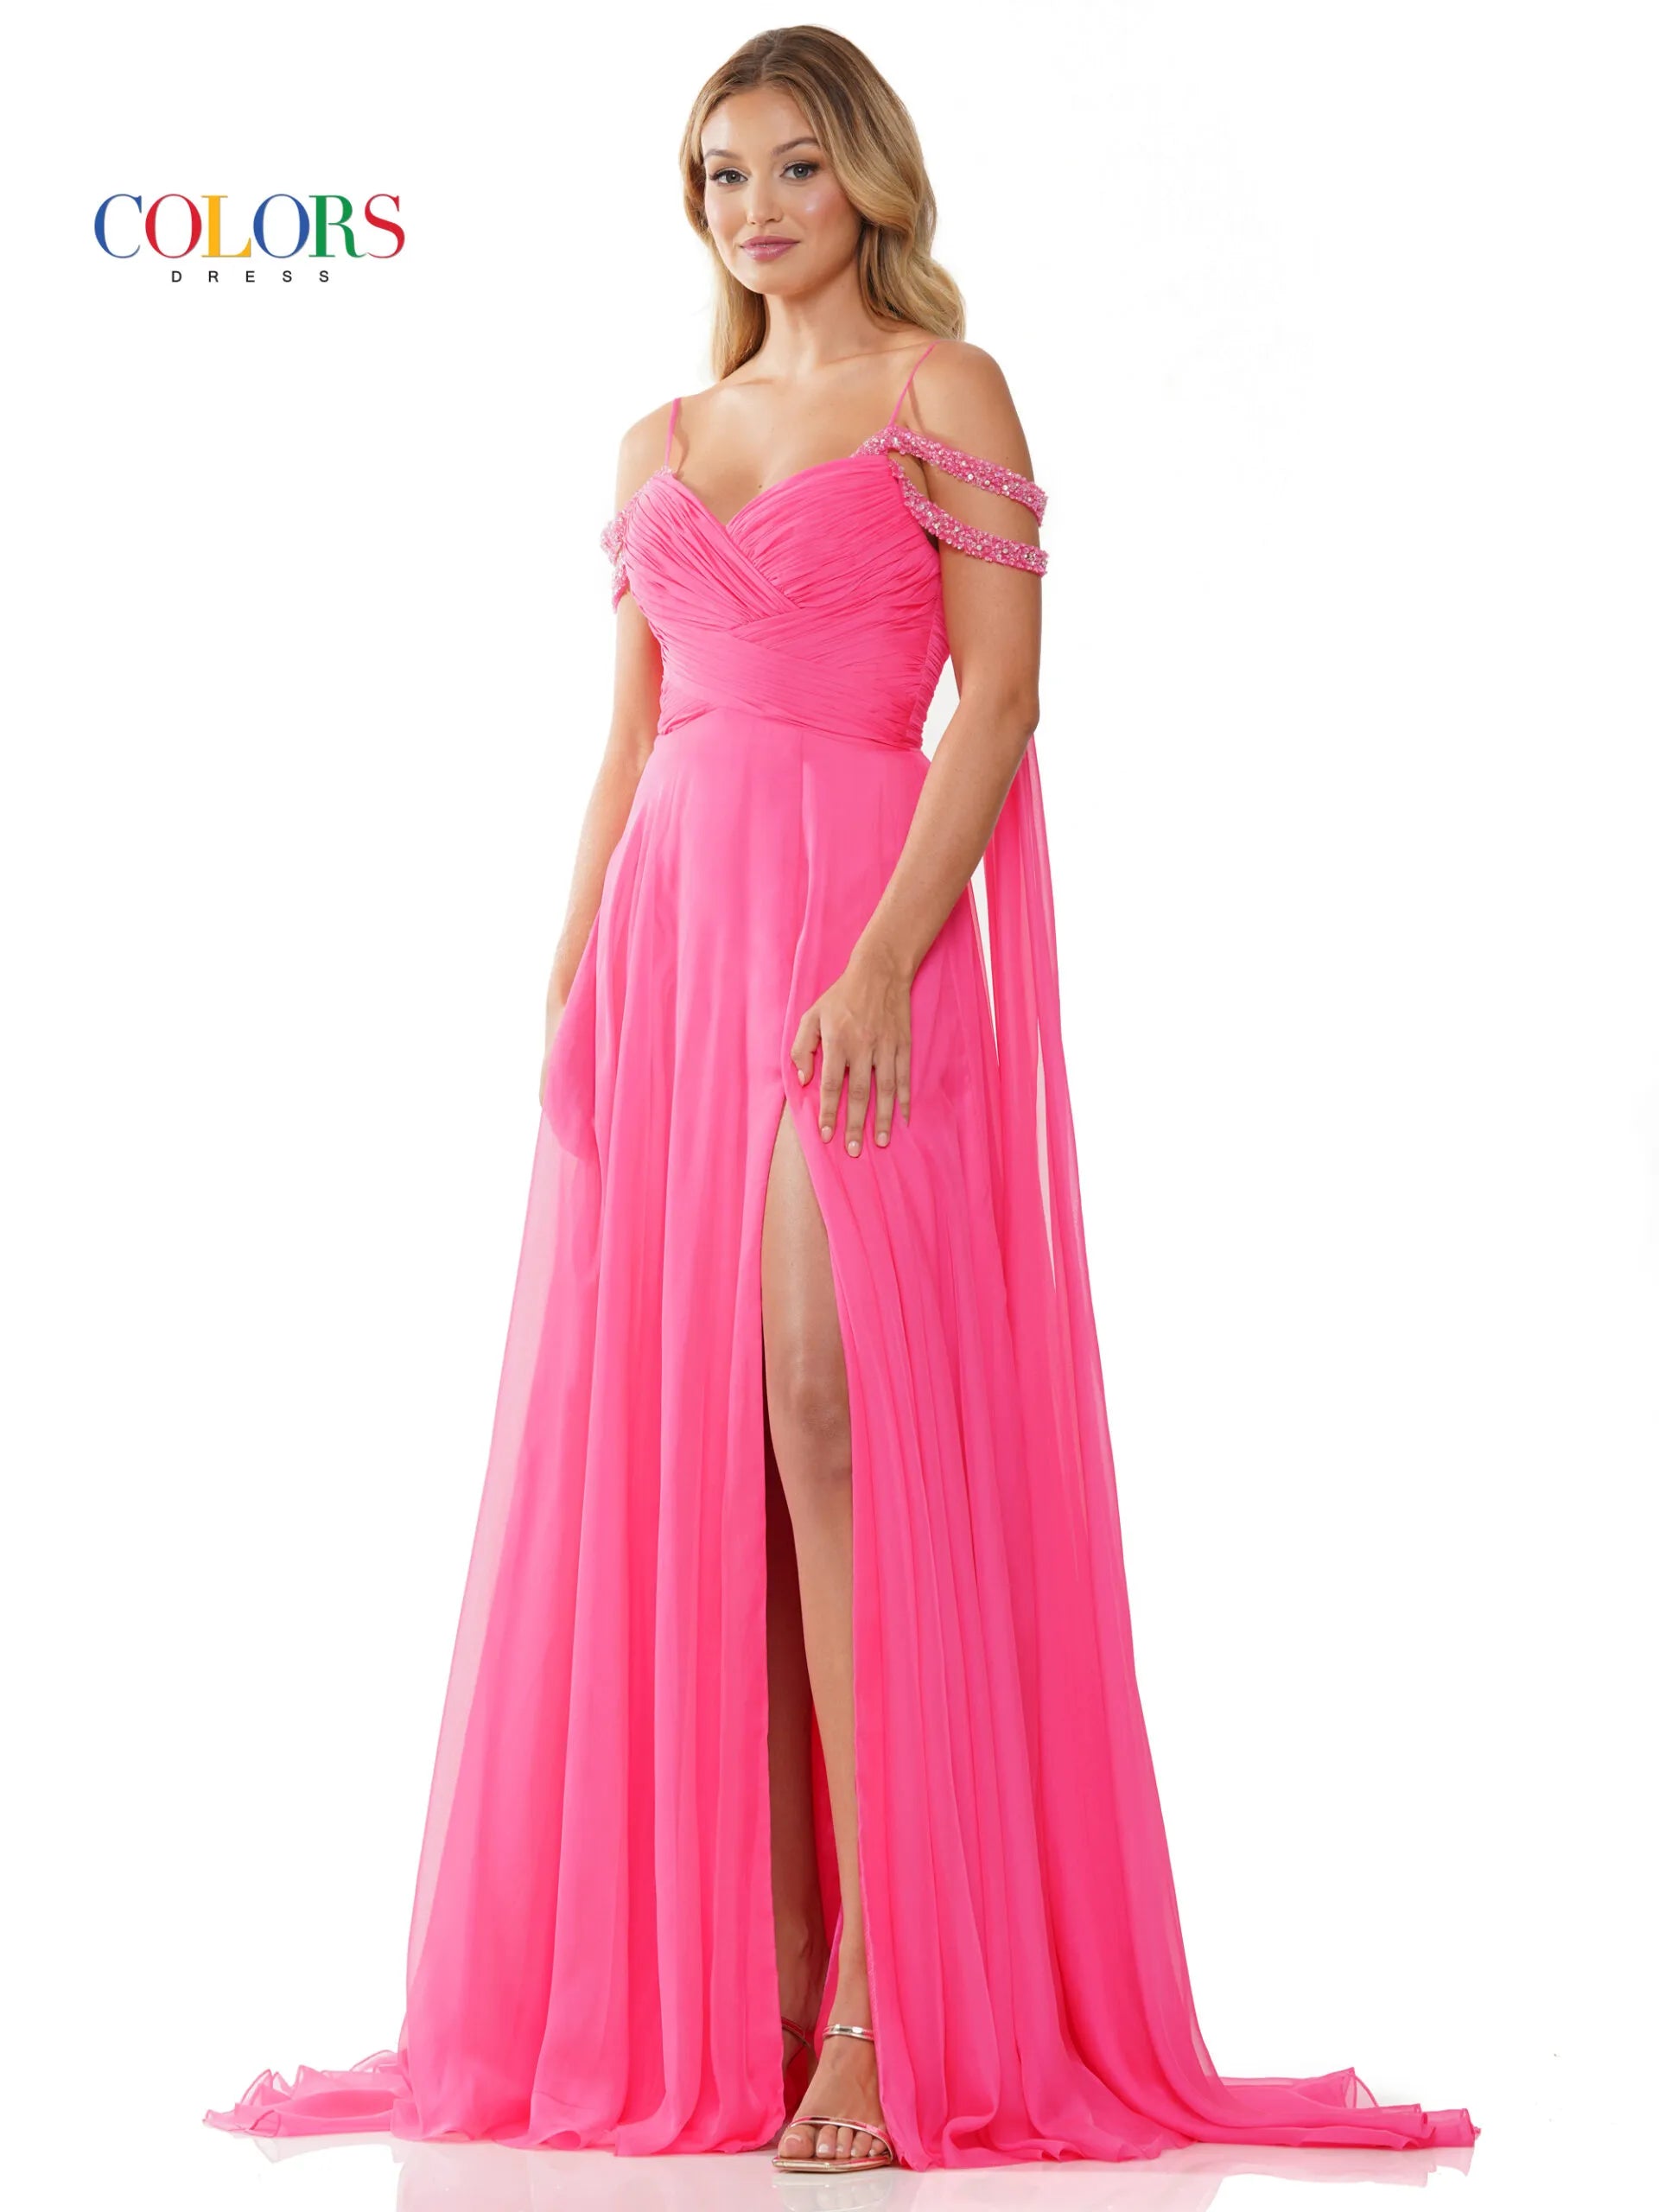 Women's Chiffon Formal Dresses & Evening Gowns | Nordstrom